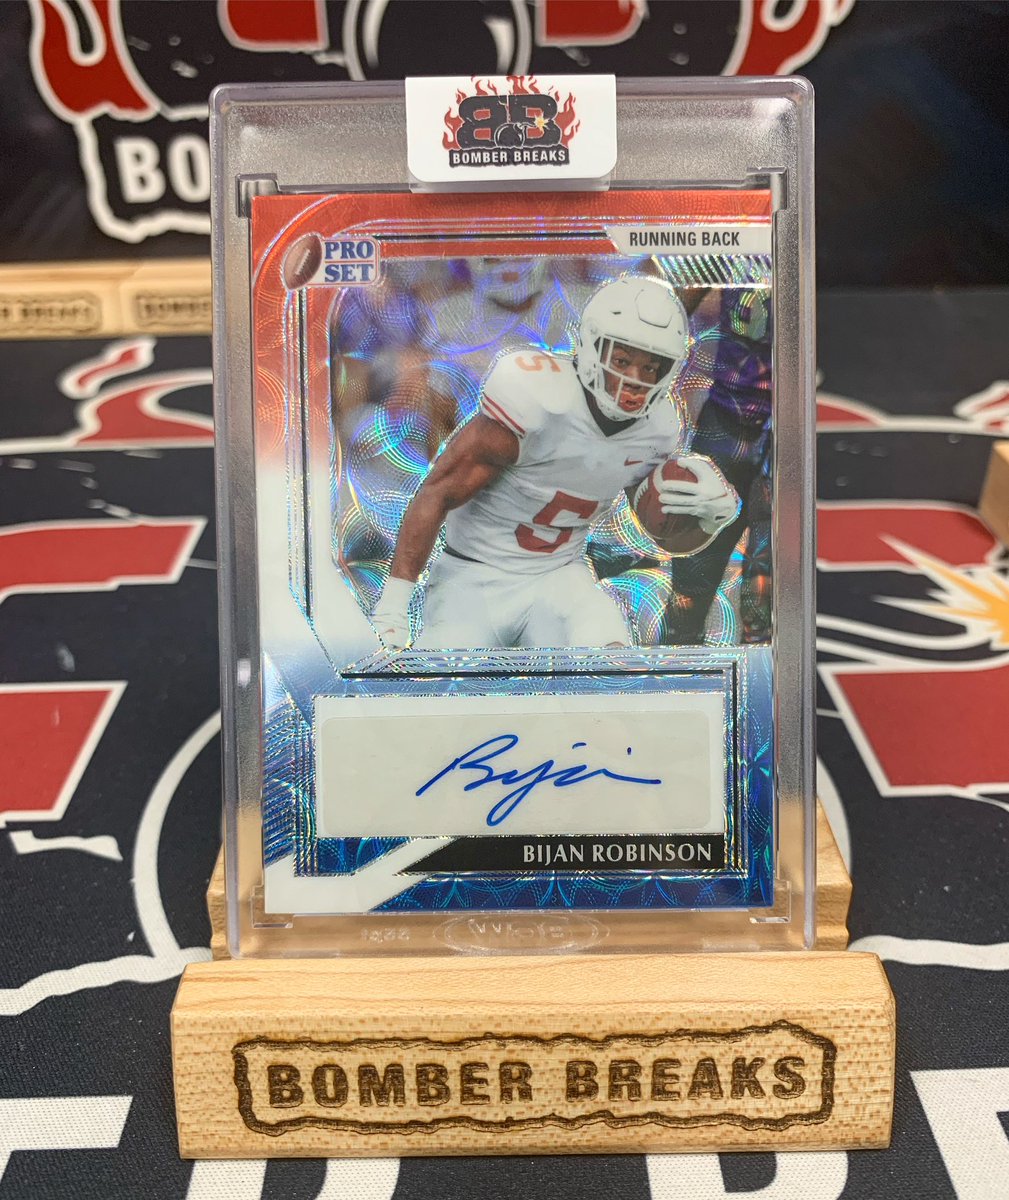 Bijan Robinson 1/1 Metal Red White and Blue Auto pulled from our @leaftradingcards Pro Set Metal Football breaks!
🔥🔥 @Bijan5Robinson 
#footballcards #atlantafalcons #falcons #texaslonghorns #texas #groupbreaks #thehobby #casebreaks #boxbreaks #boom #oneofone